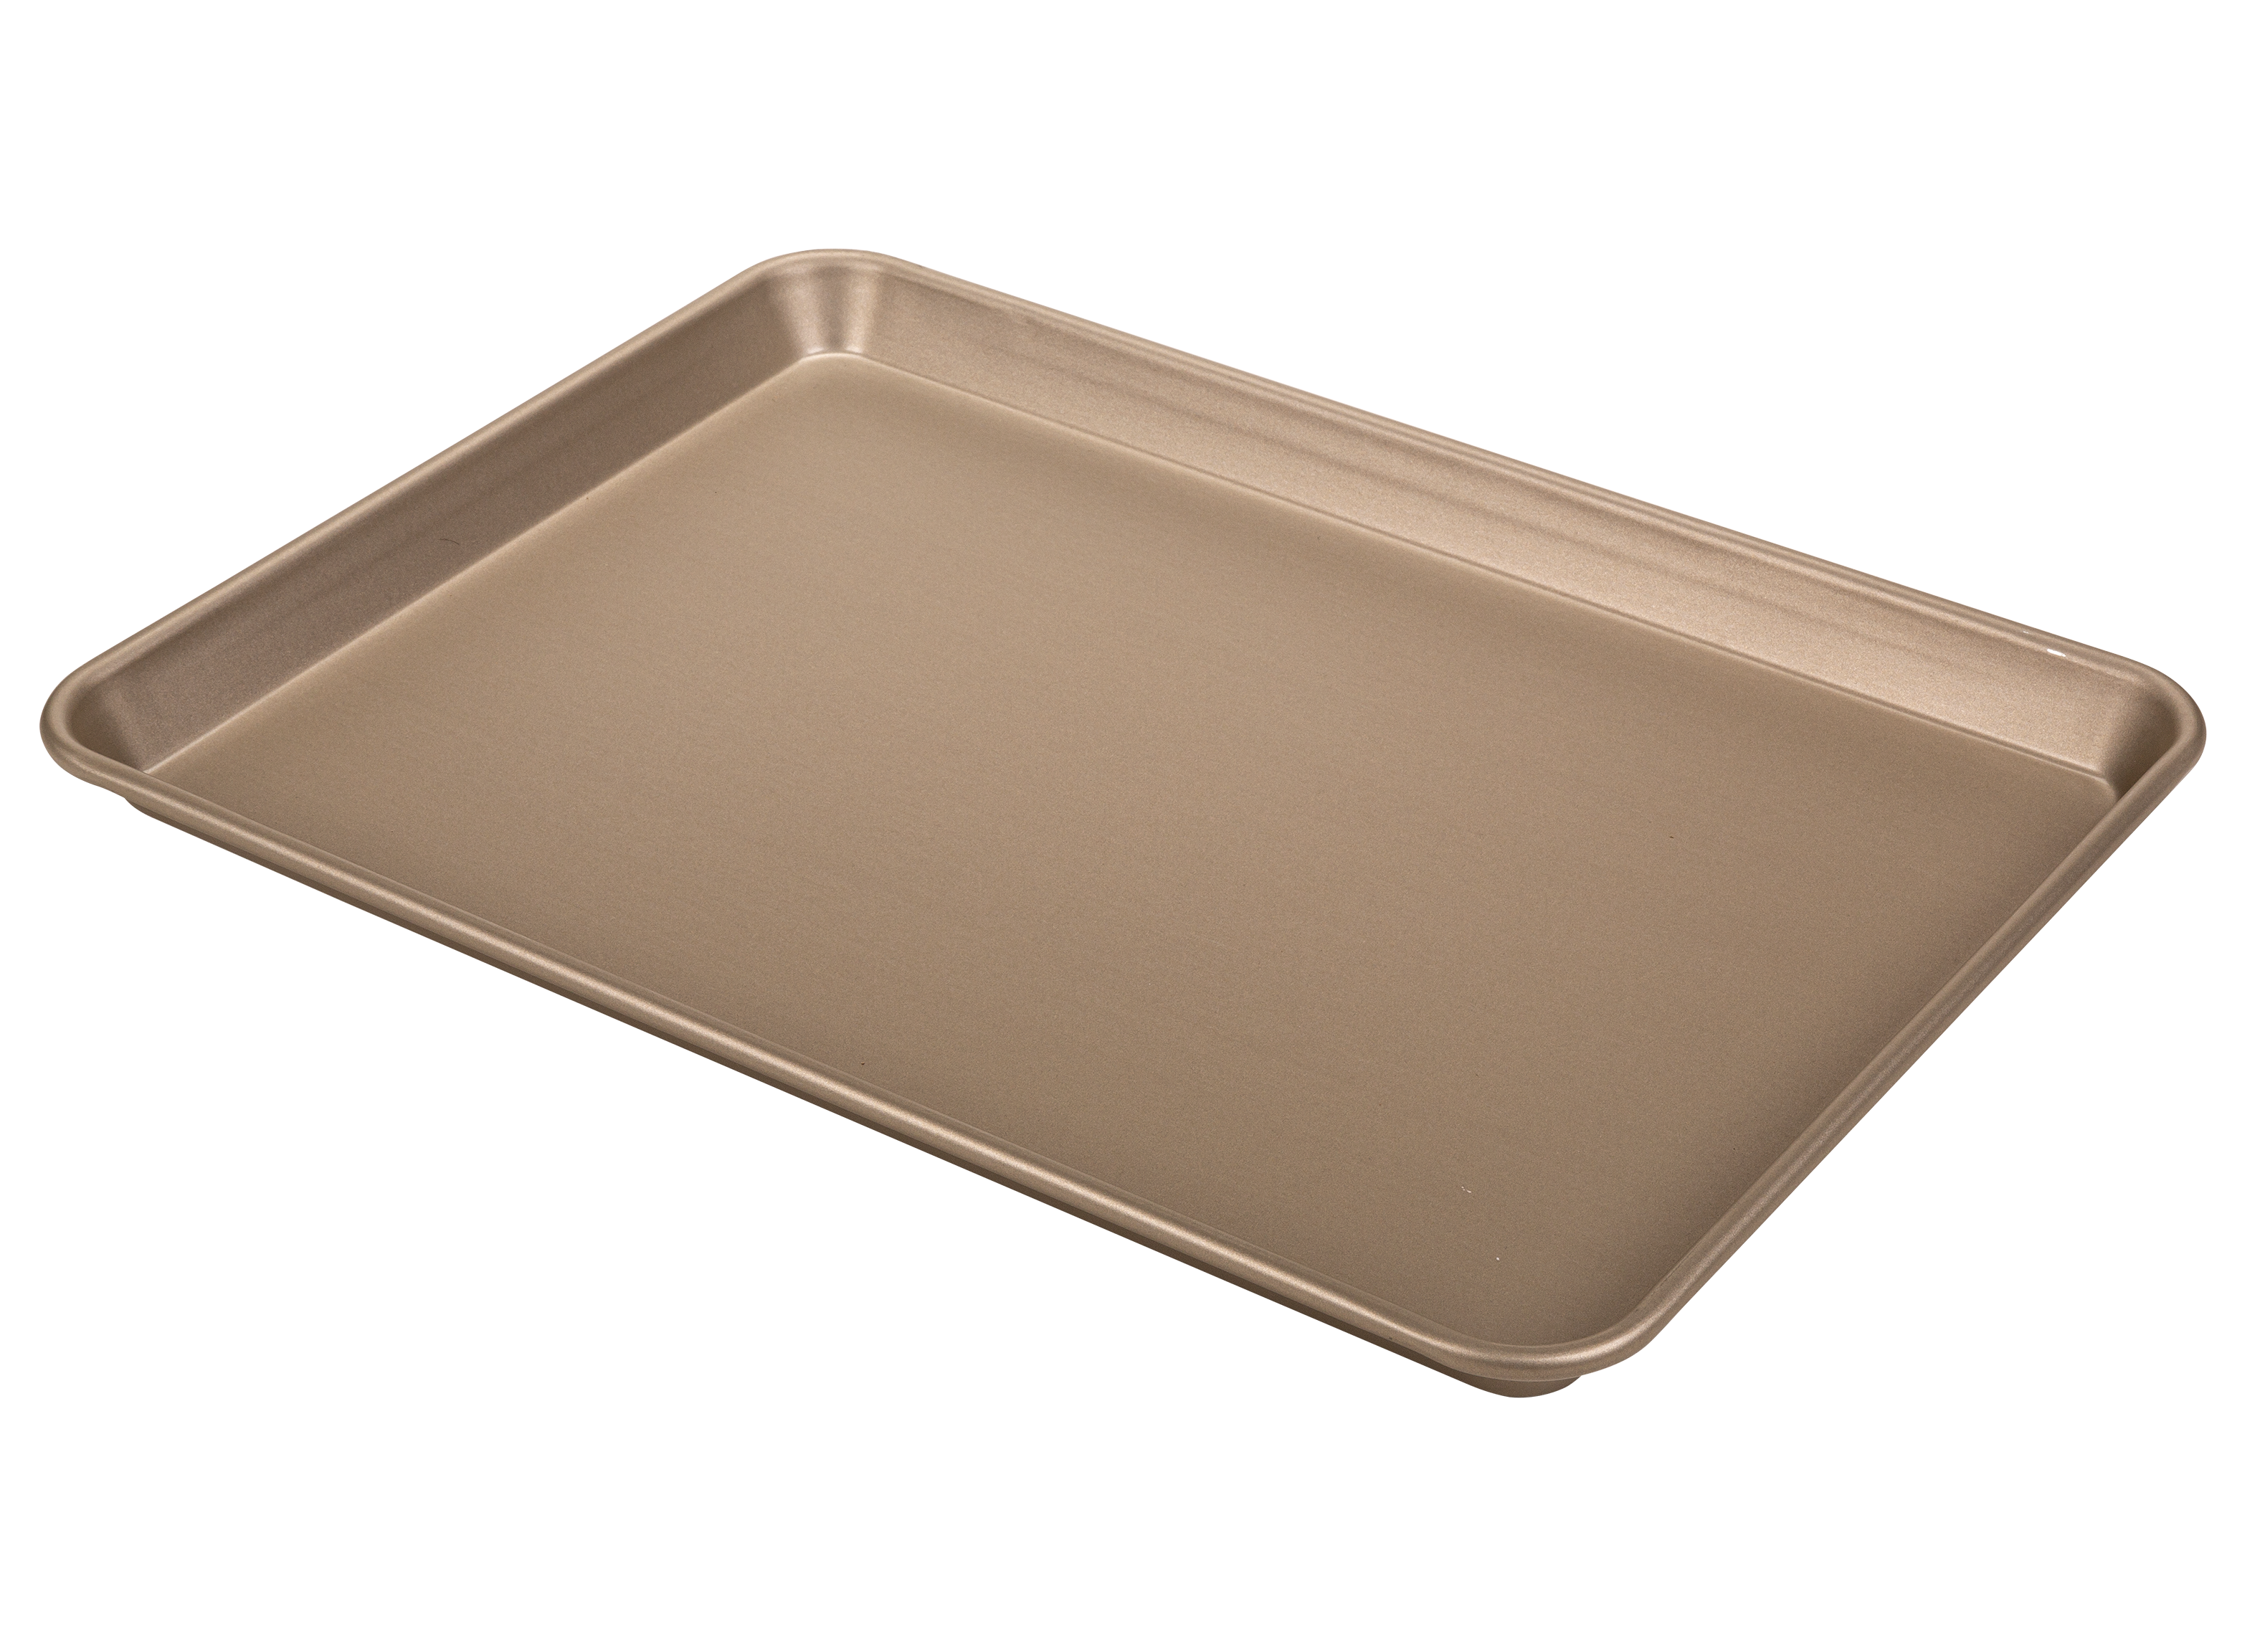 https://crdms.images.consumerreports.org/prod/products/cr/models/404171-sheet-pans-mainstays-walmart-gold-nonstick-half-sheet-pan-10022105.png